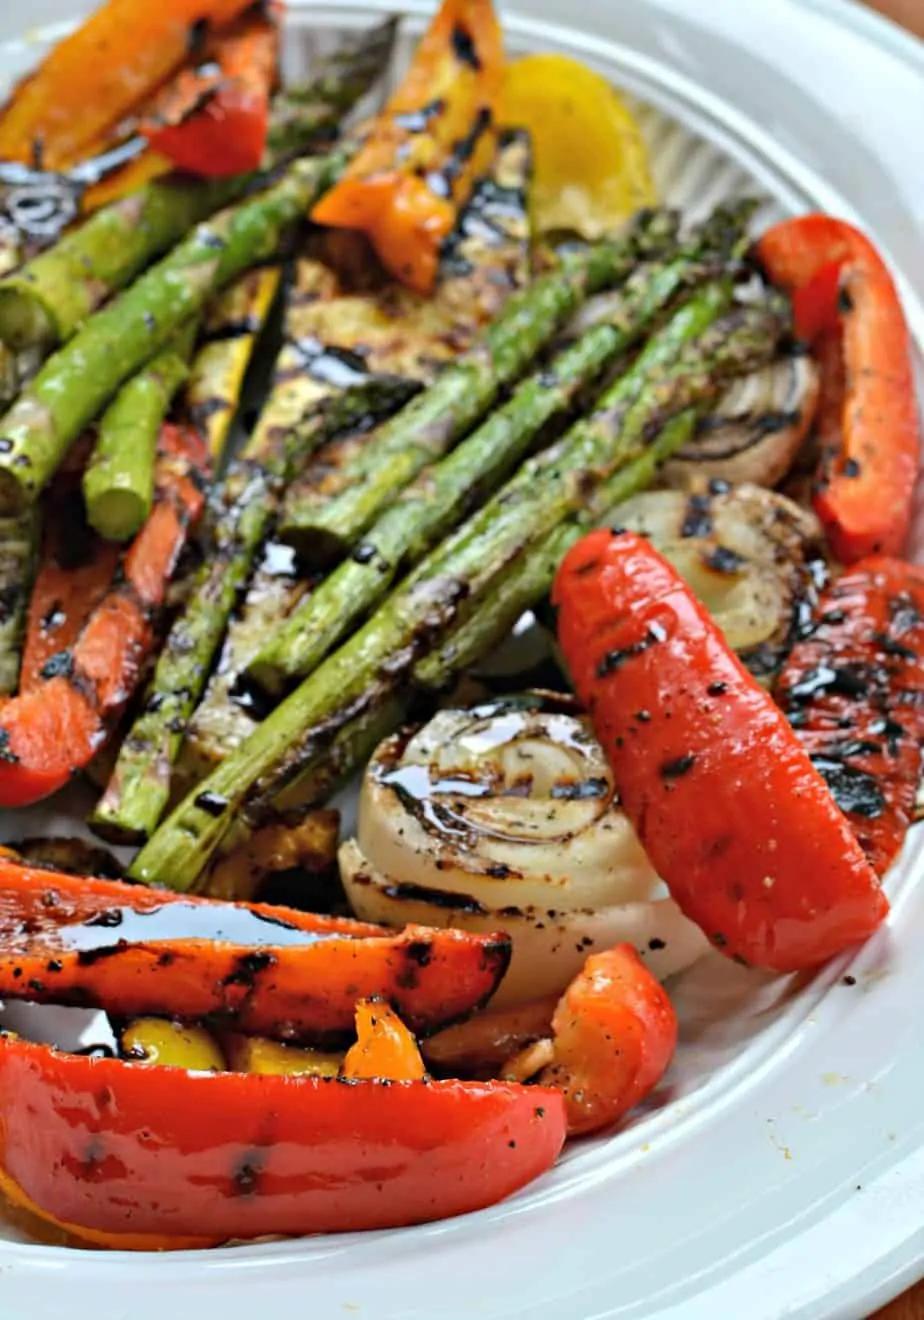 A fun and easy grilled vegetable recipe with a simple balsamic reduction sauce.  